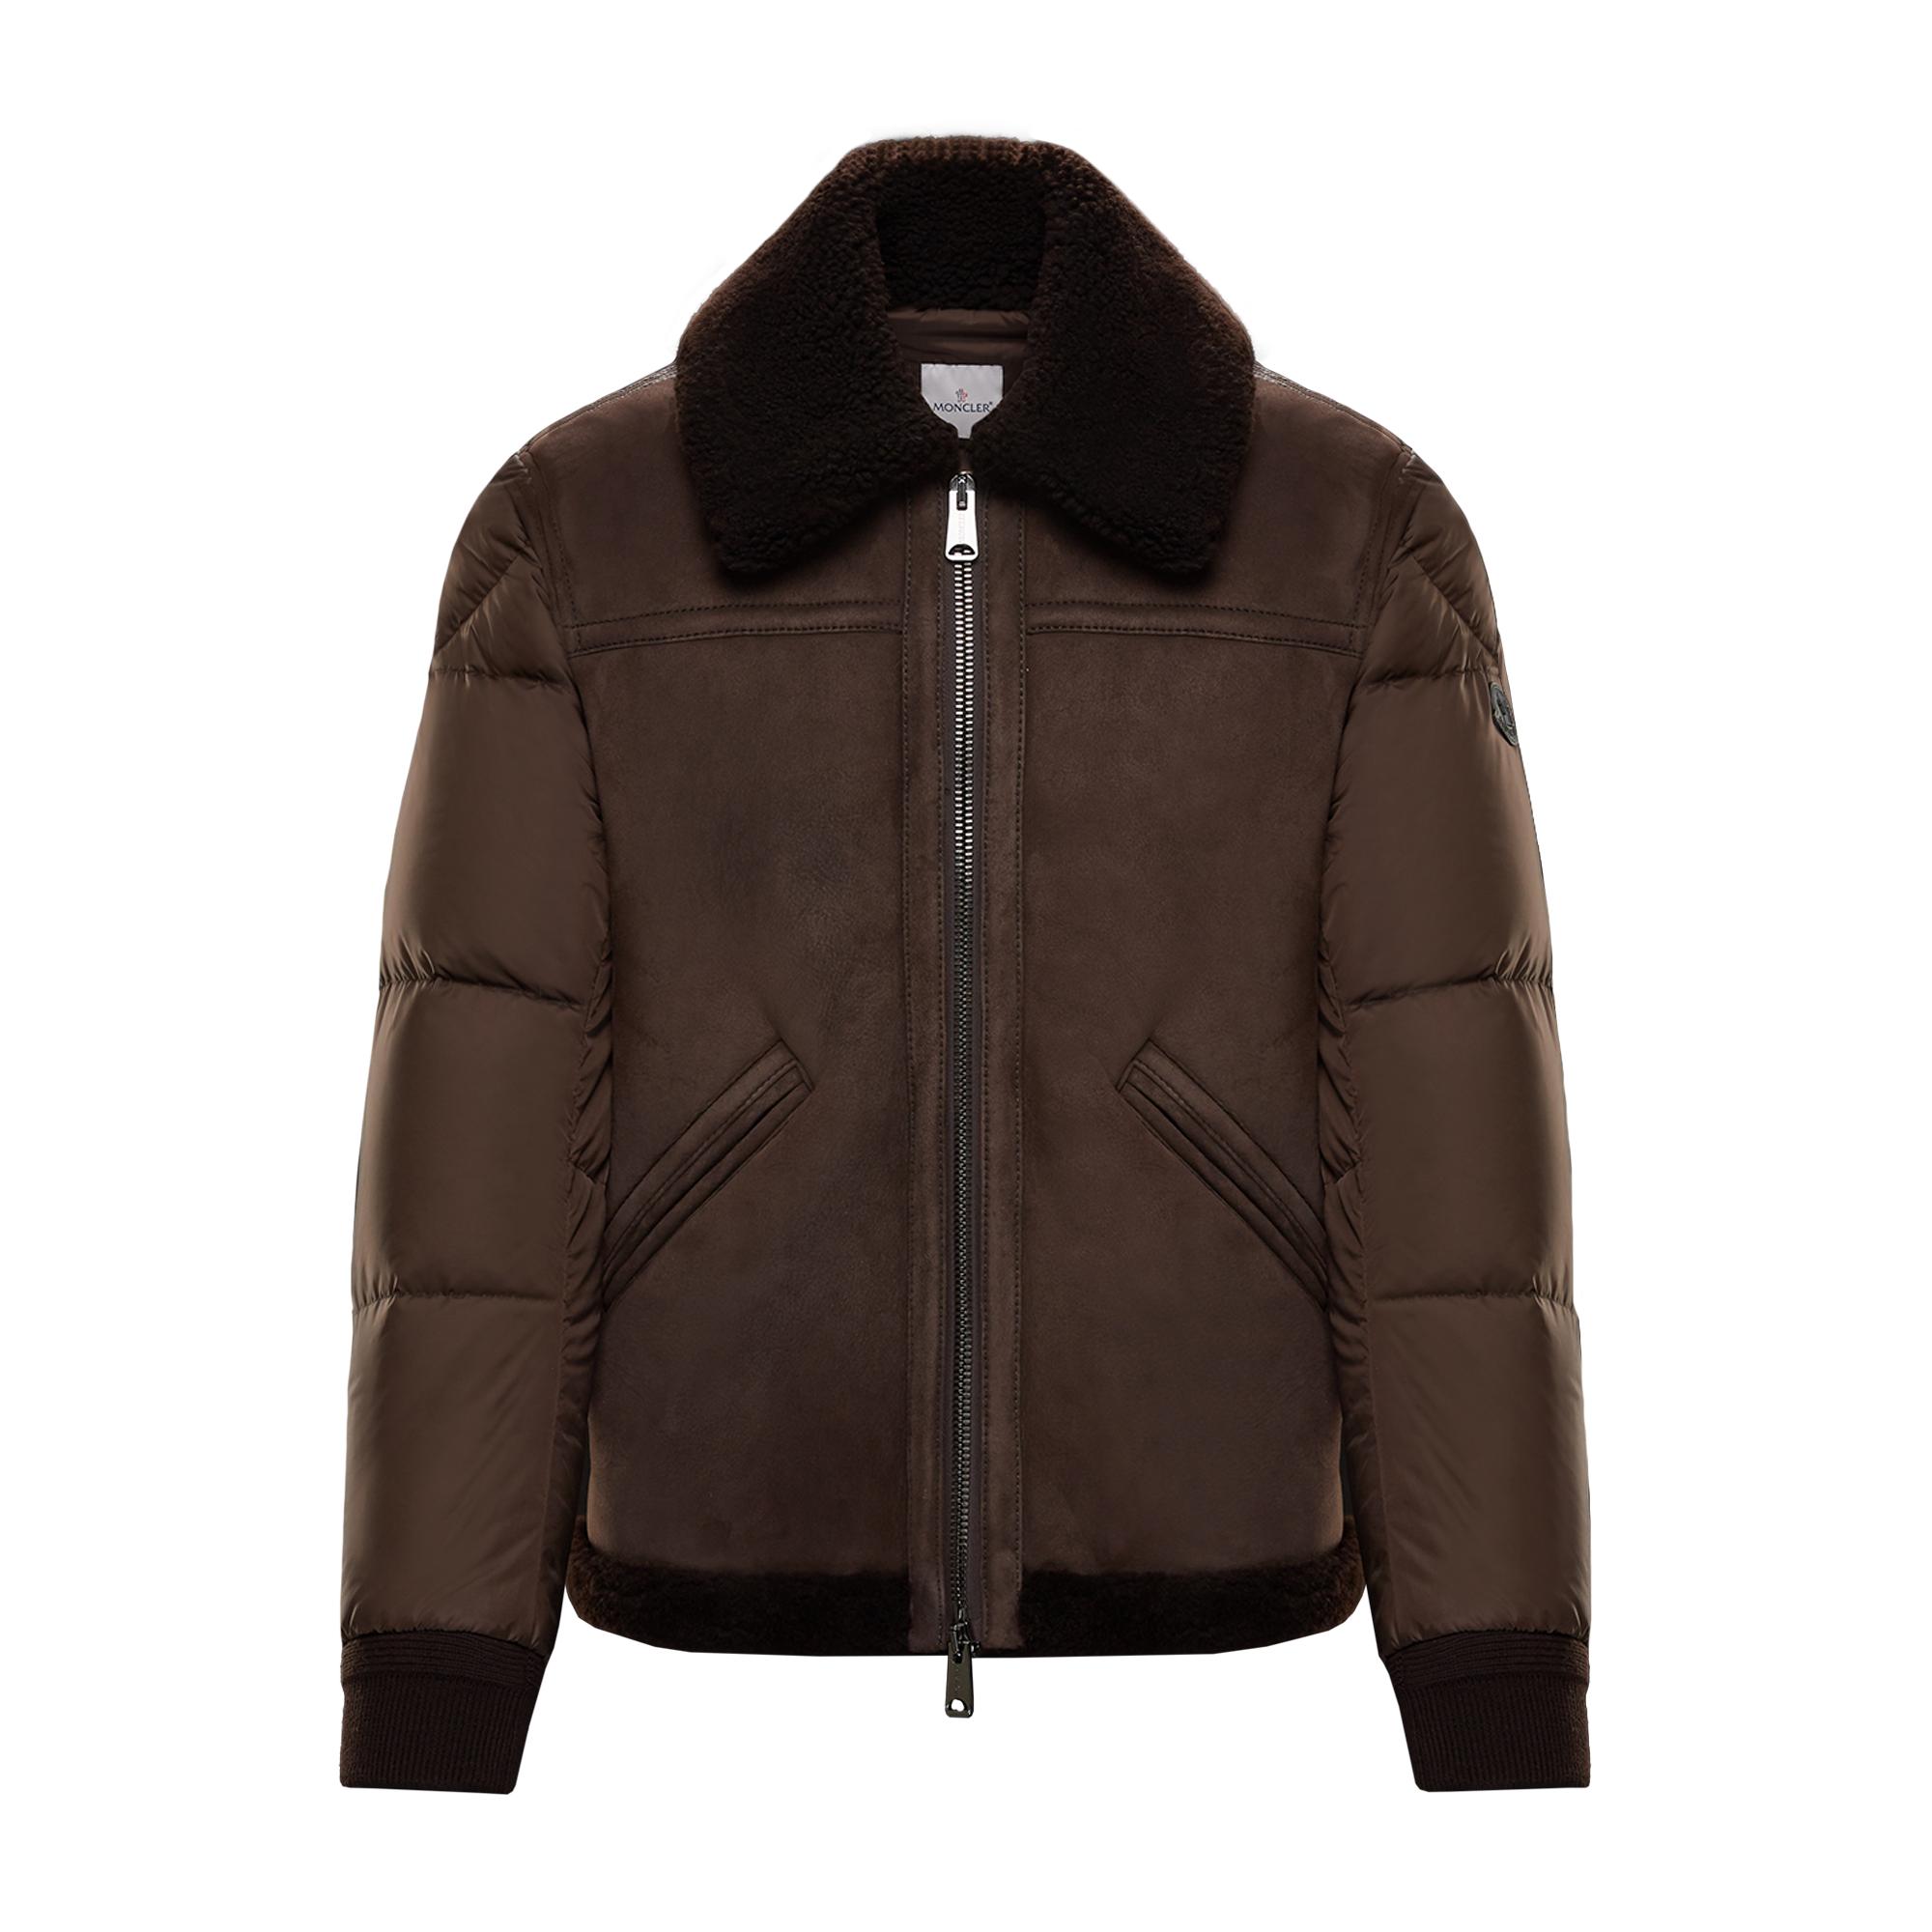 Moncler Synthetic Edwin in Brown for Men - Lyst